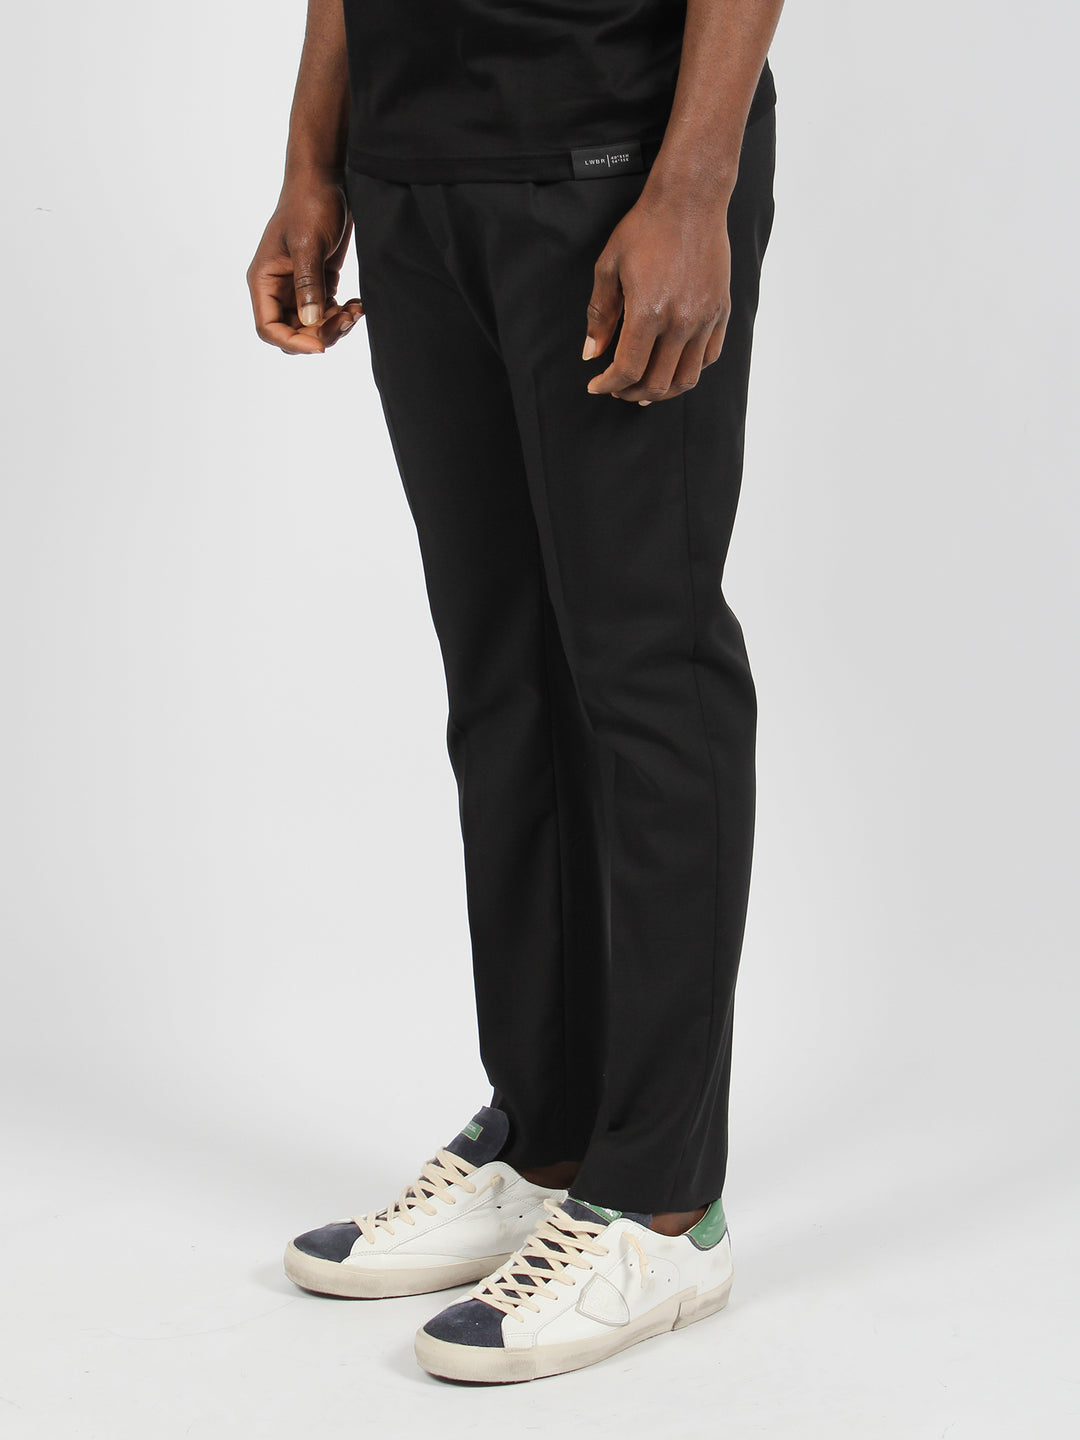 Rivale tropical wool trousers